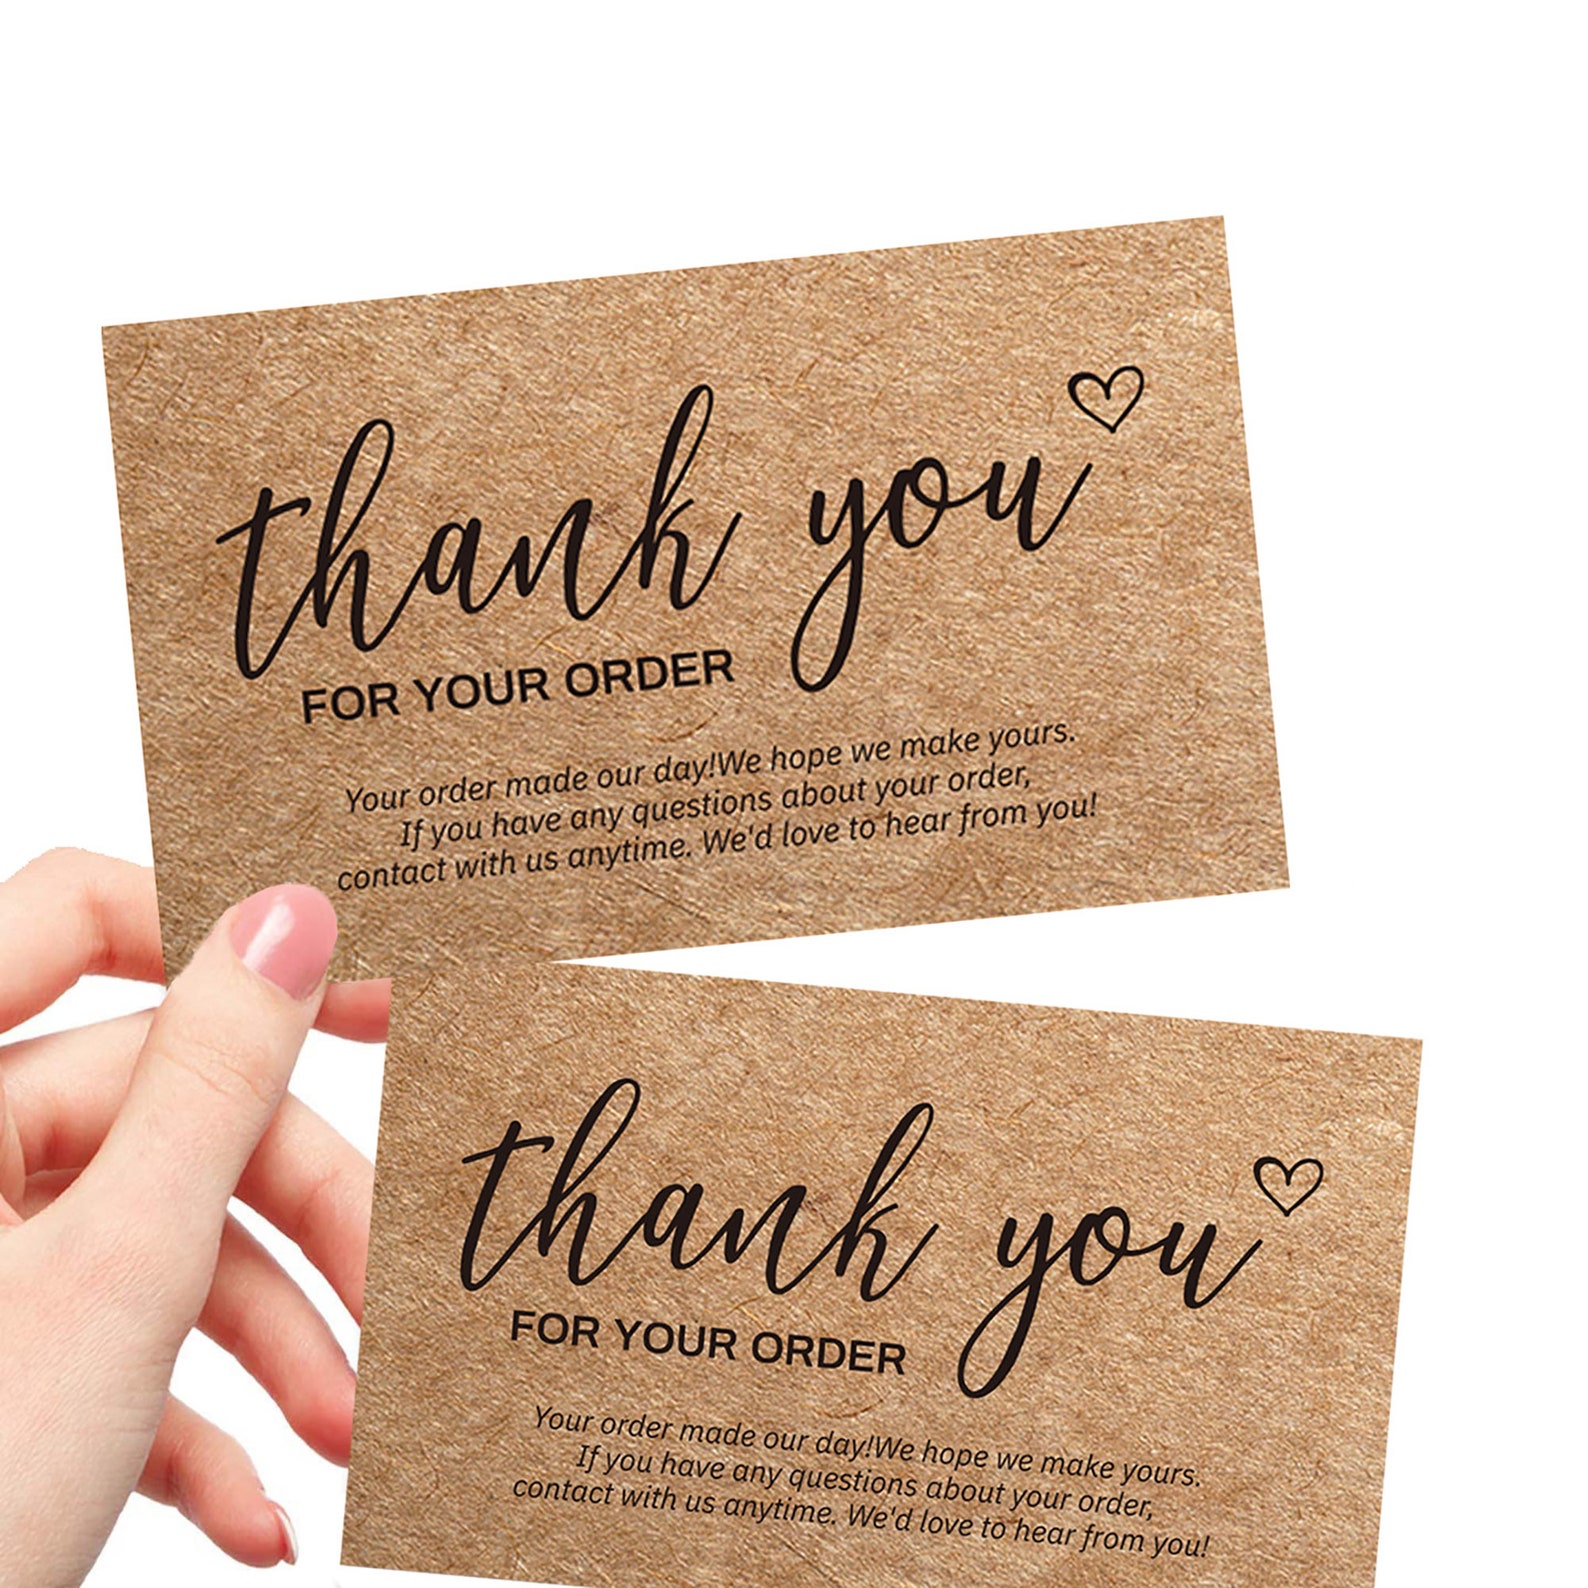 30-thank-you-for-your-order-card-kraft-paper-business-card-etsy